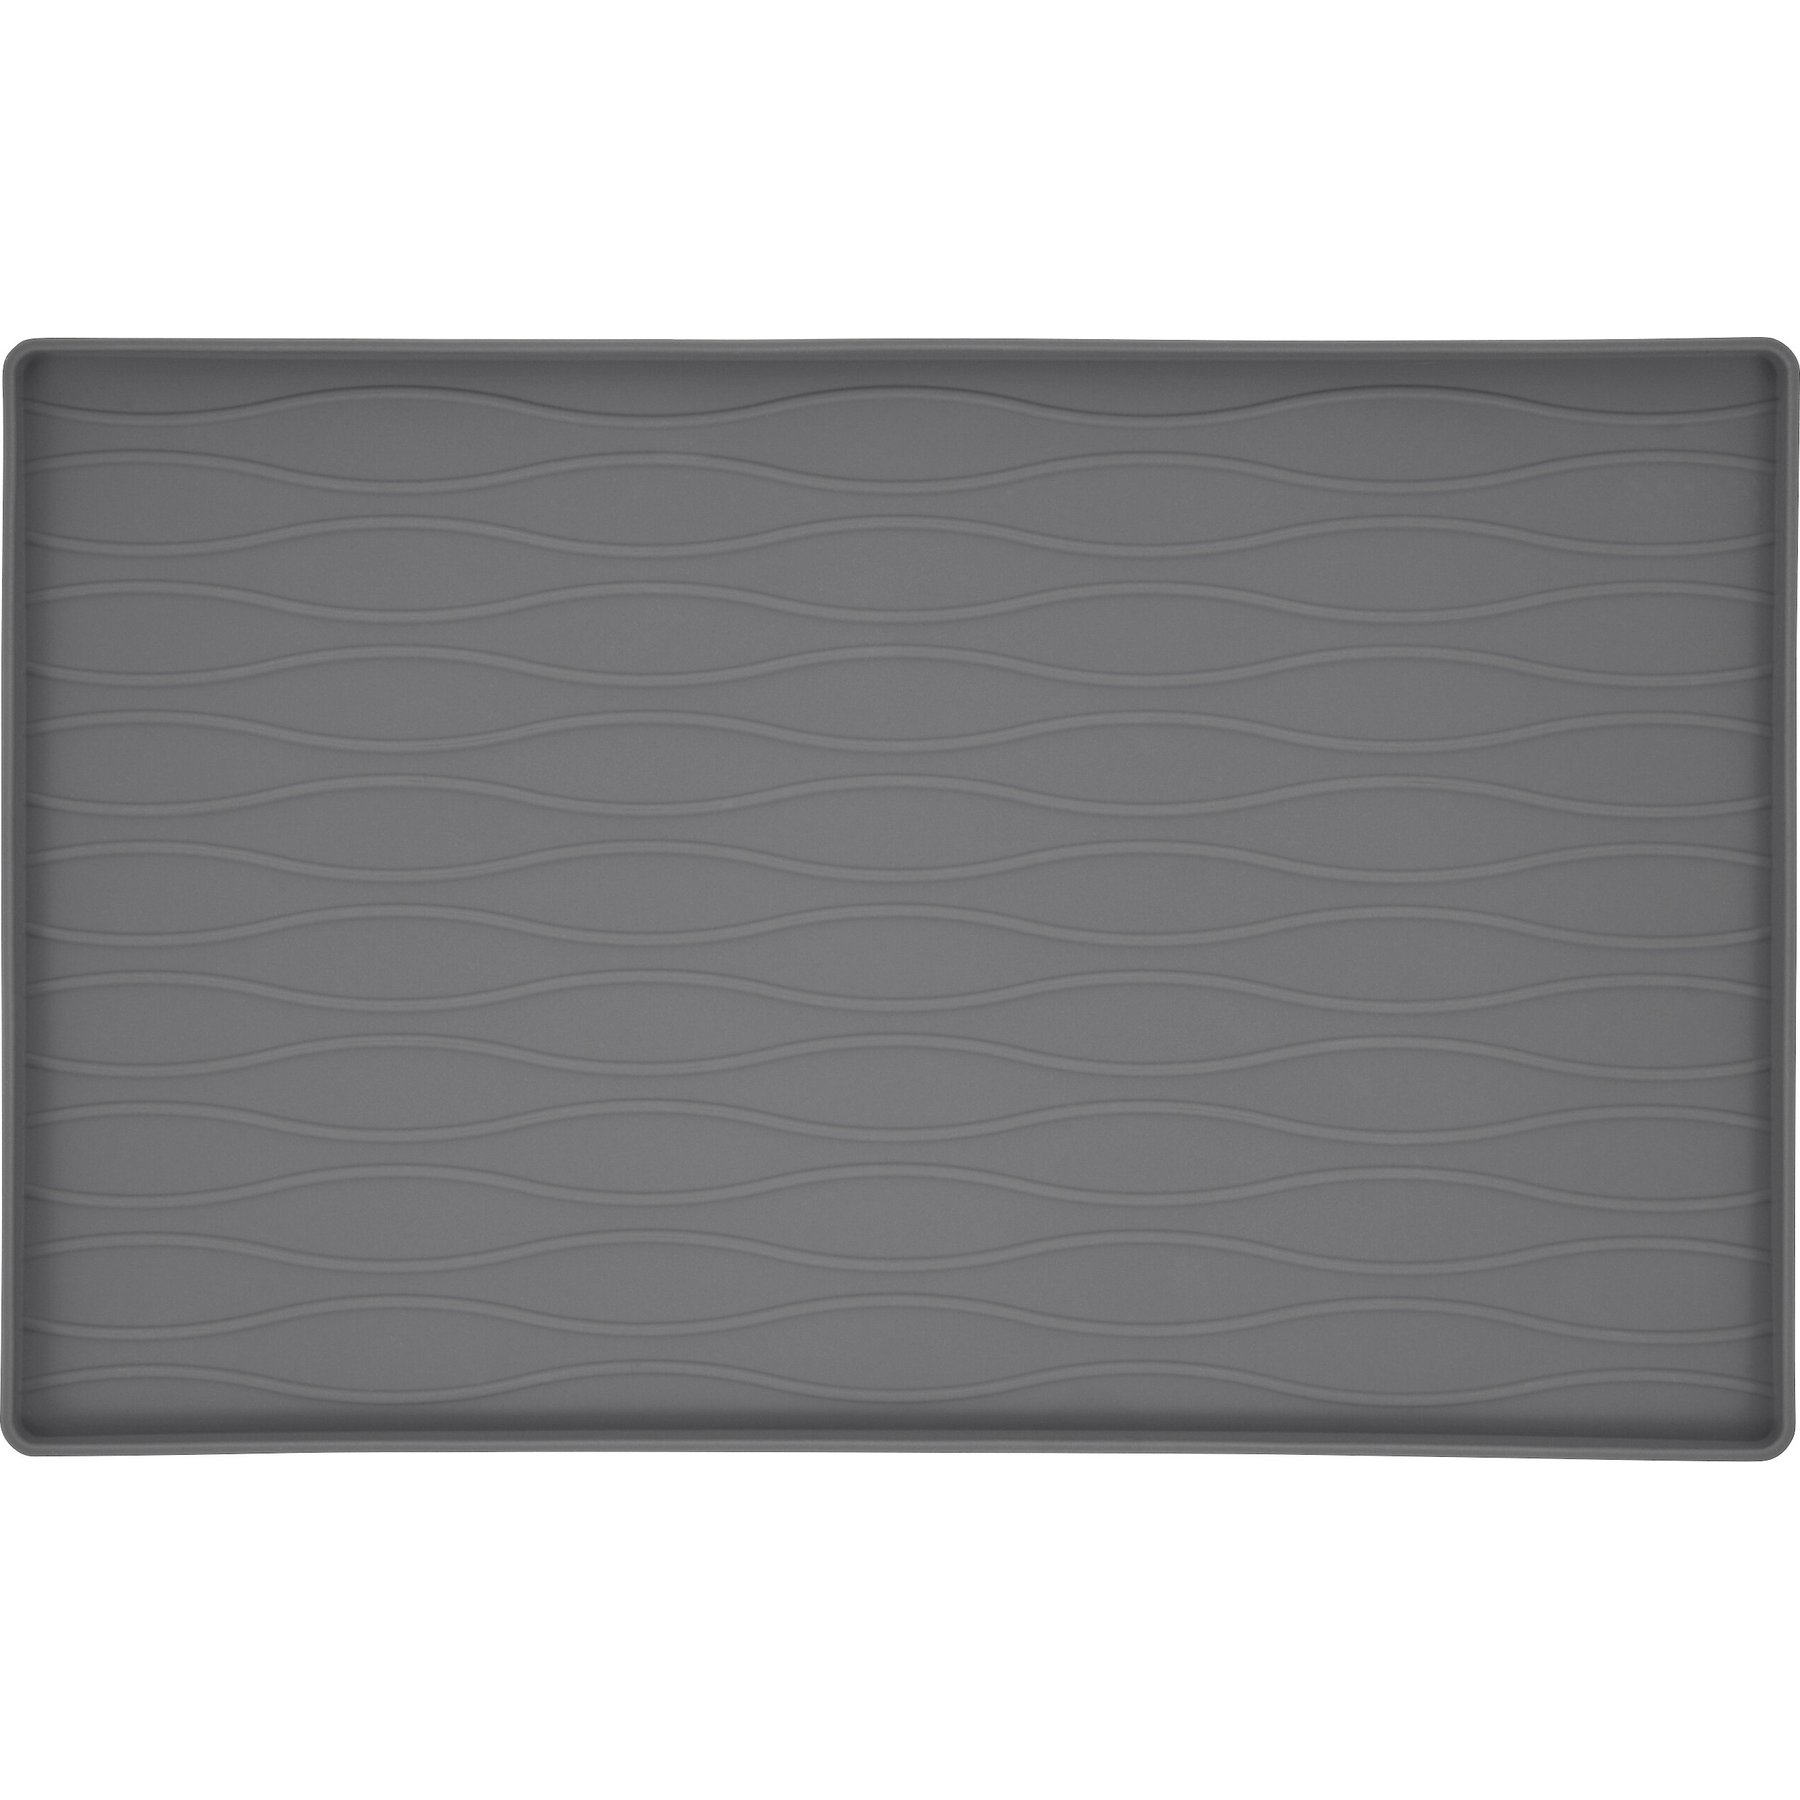 Silicone Pet Food Mat (Charcoal) – Should We Go?